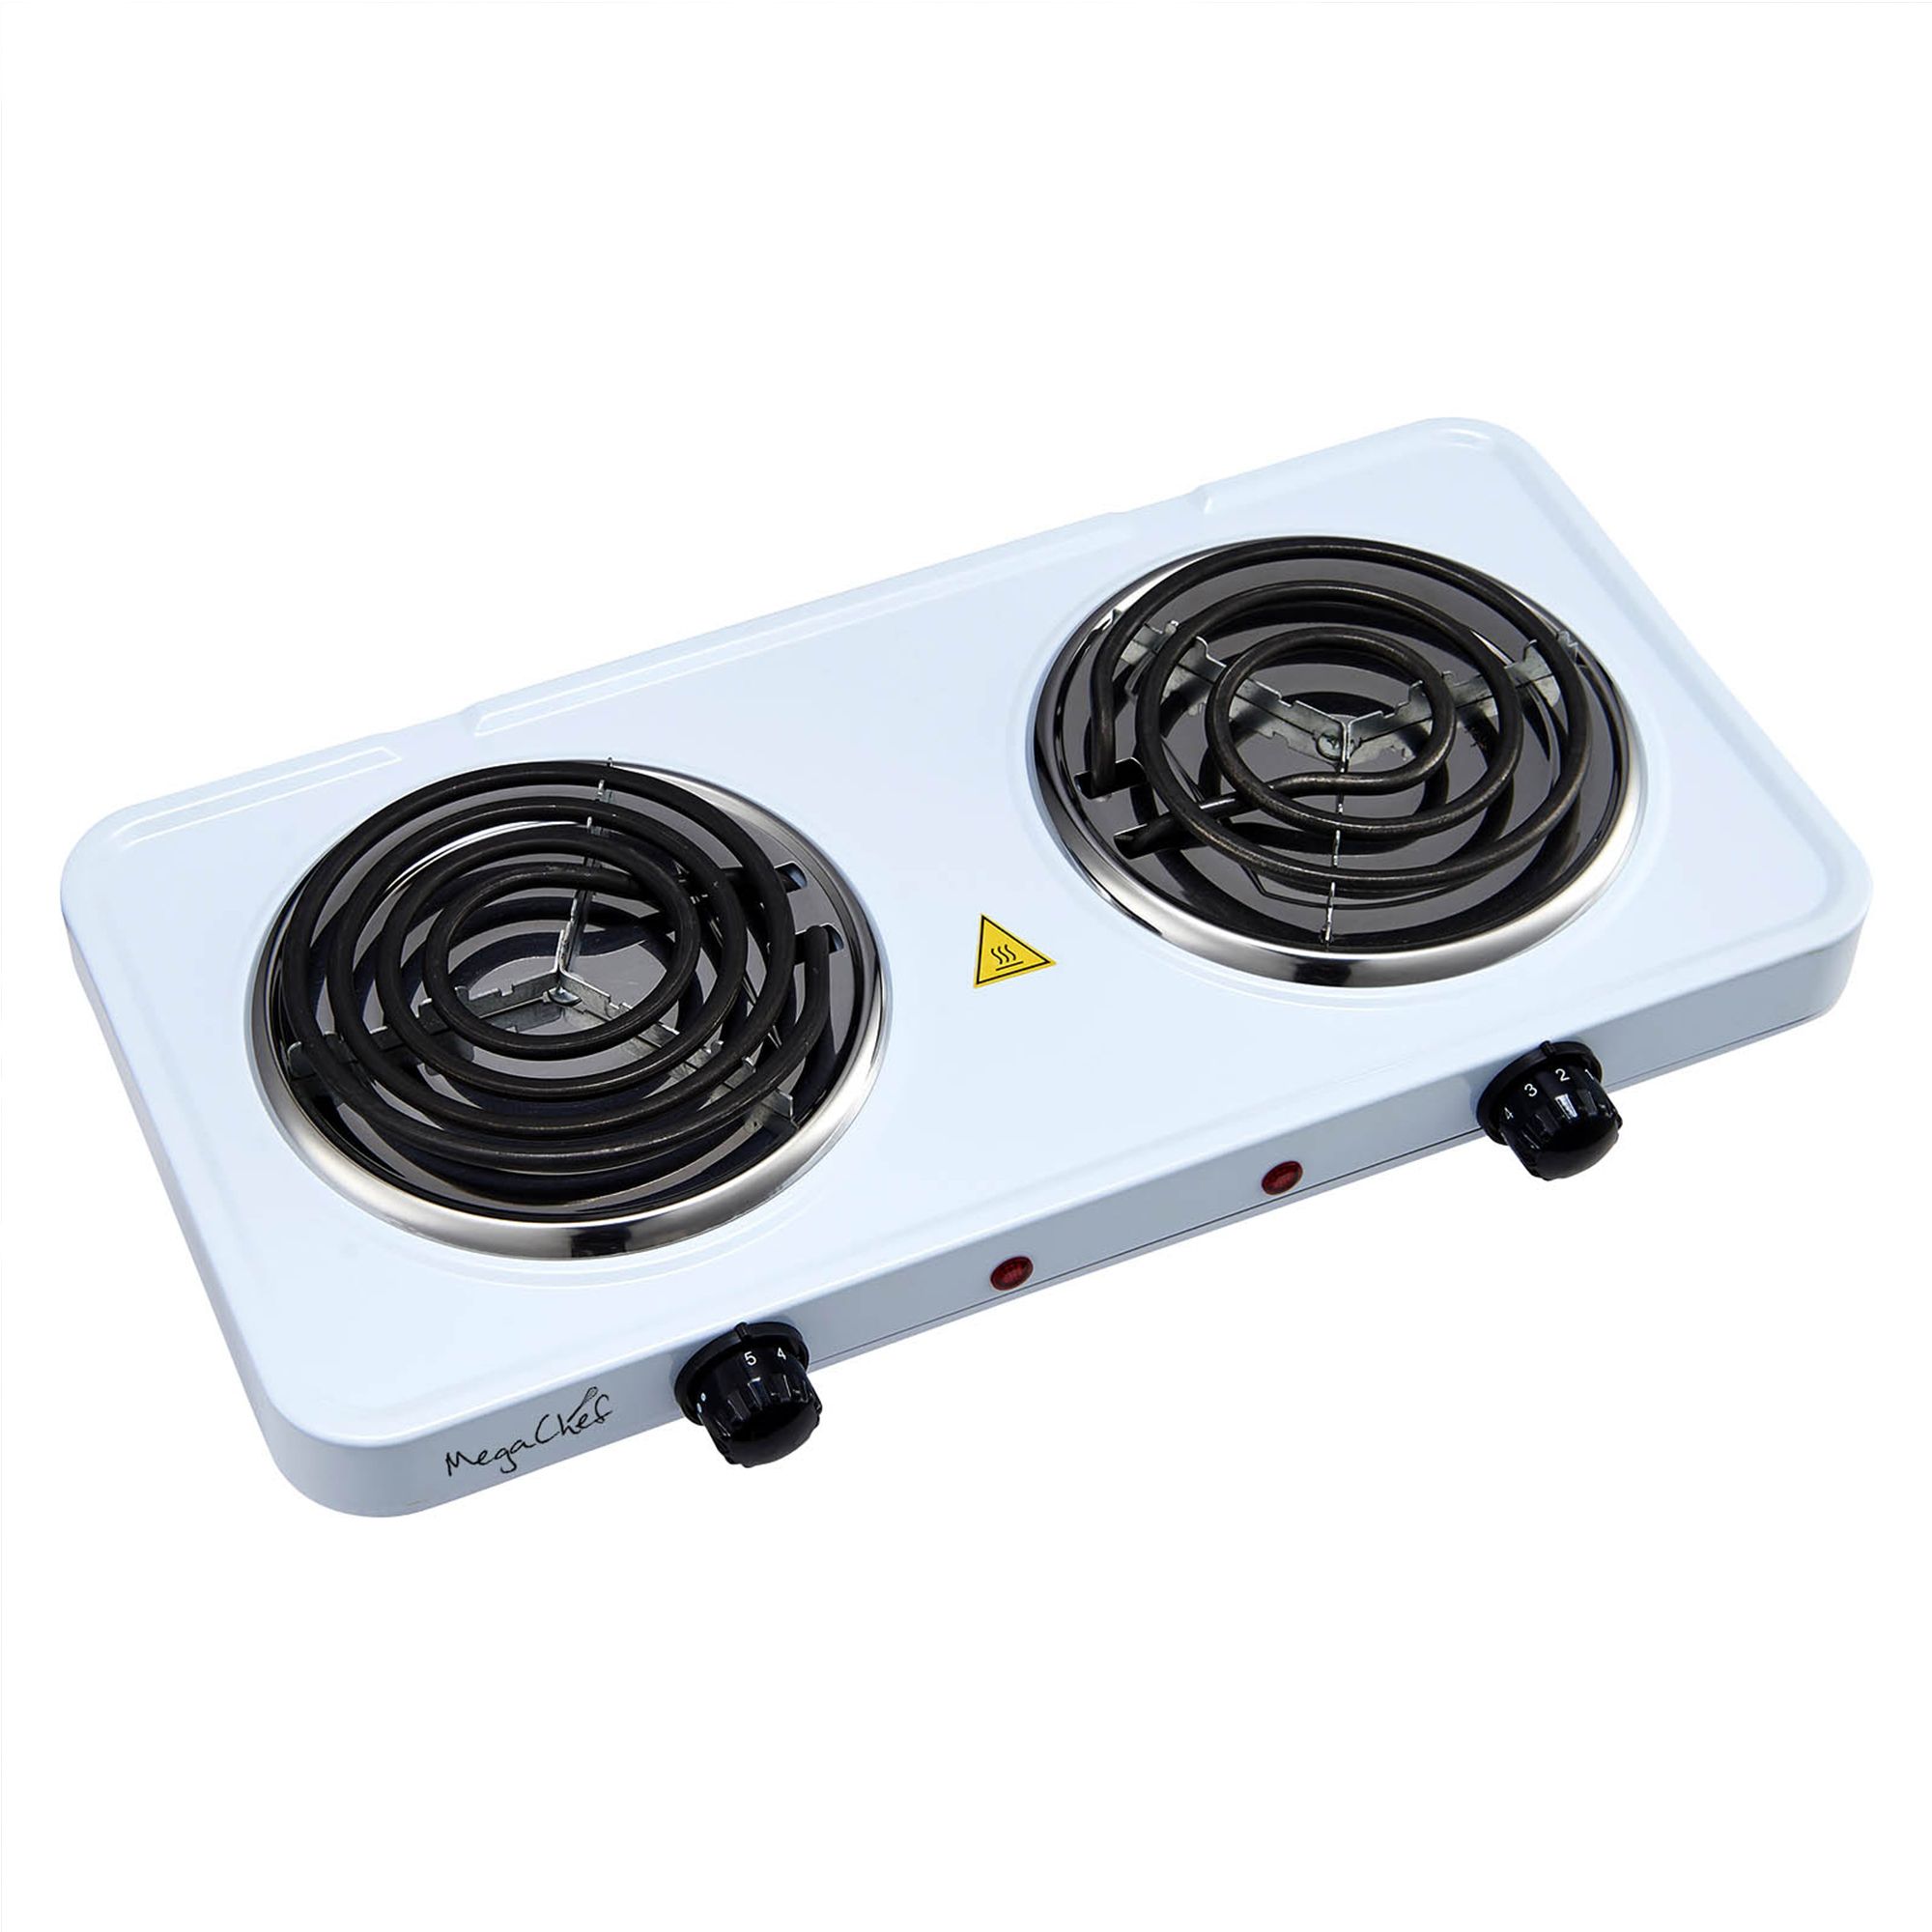 MegaChef Reversible Indoor Grill and Griddle with Removable Glass LID.